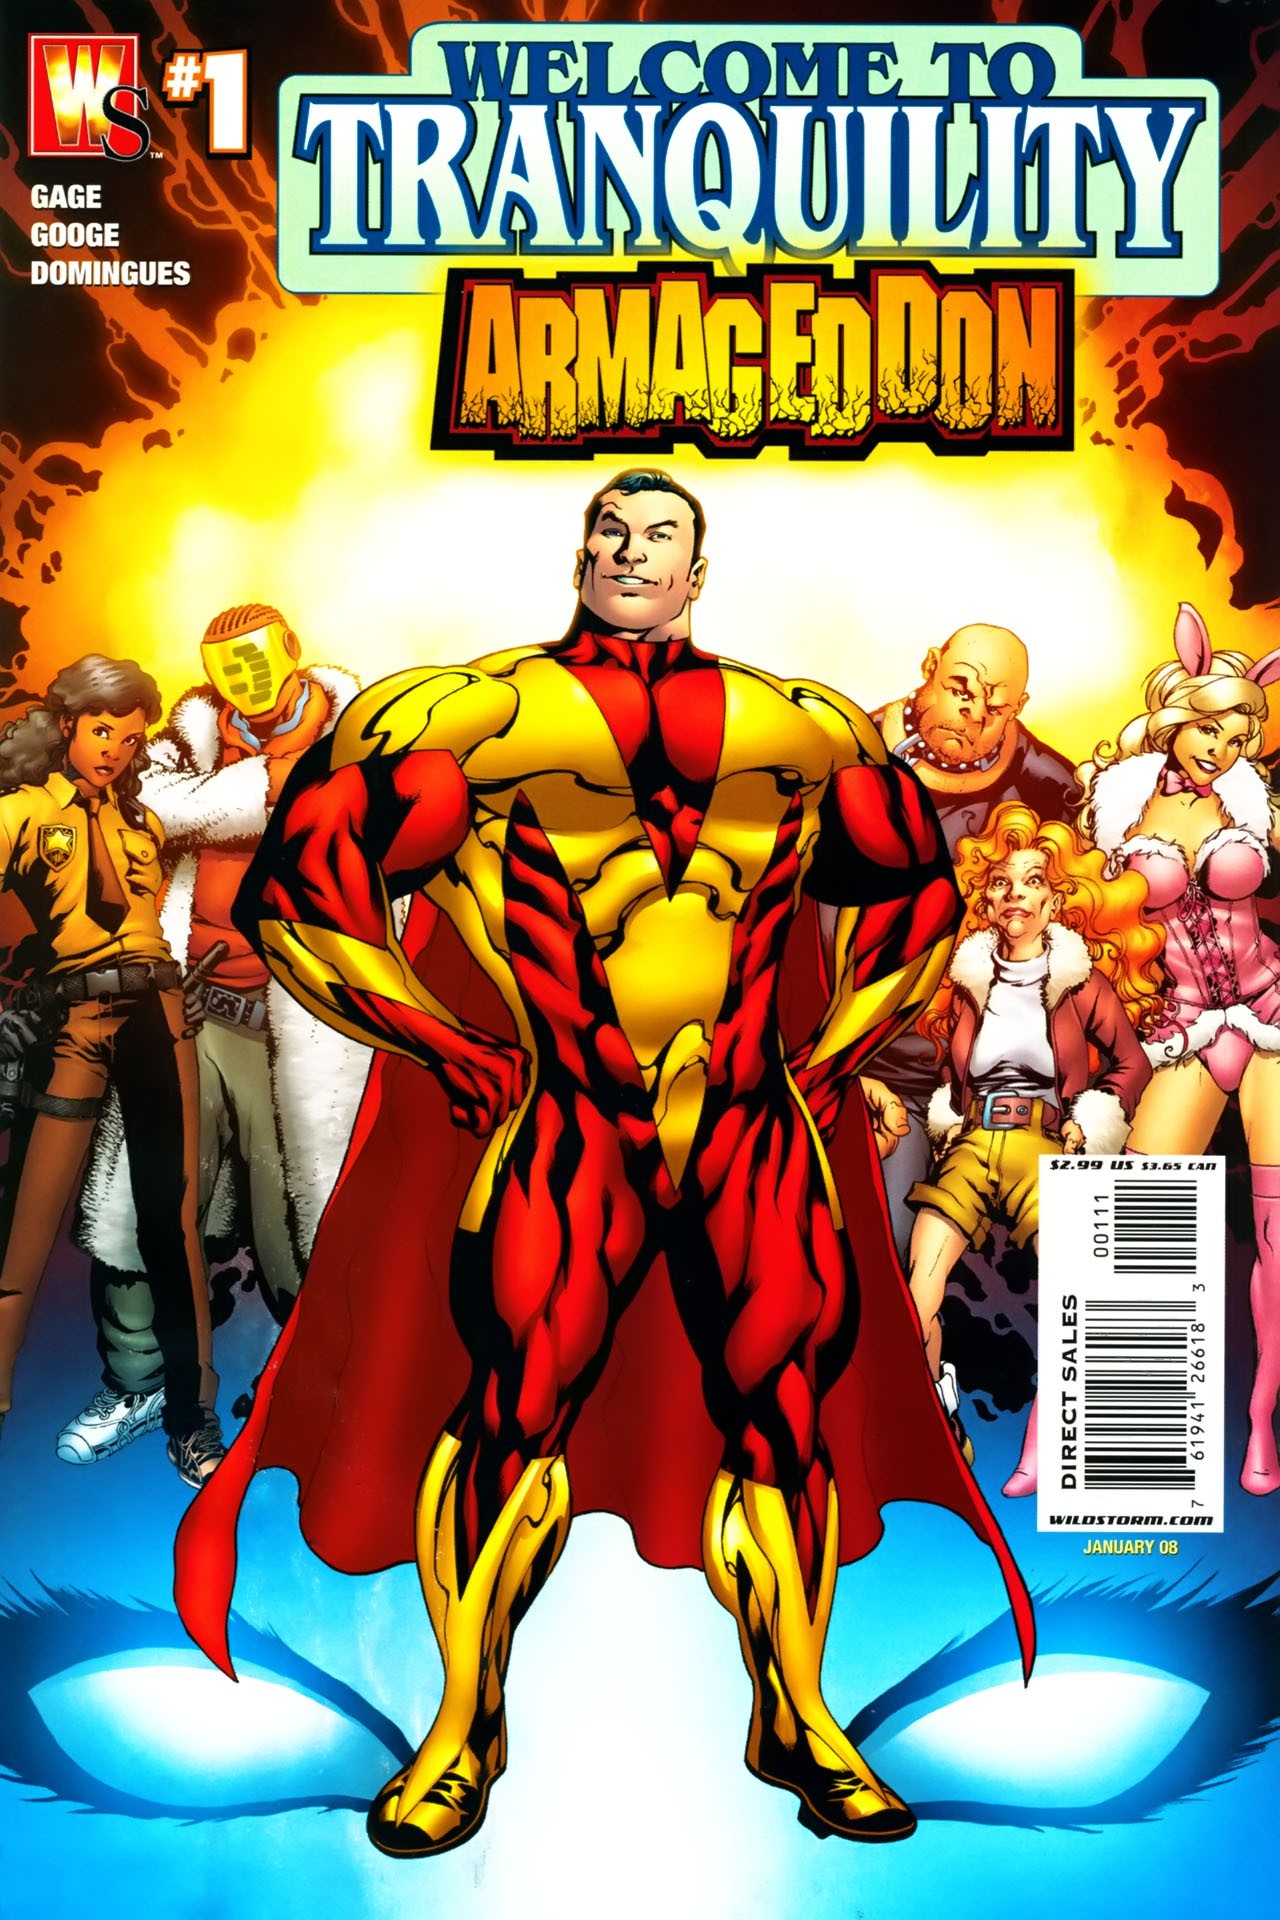 Welcome to Tranquility: Armageddon Vol. 1 #1